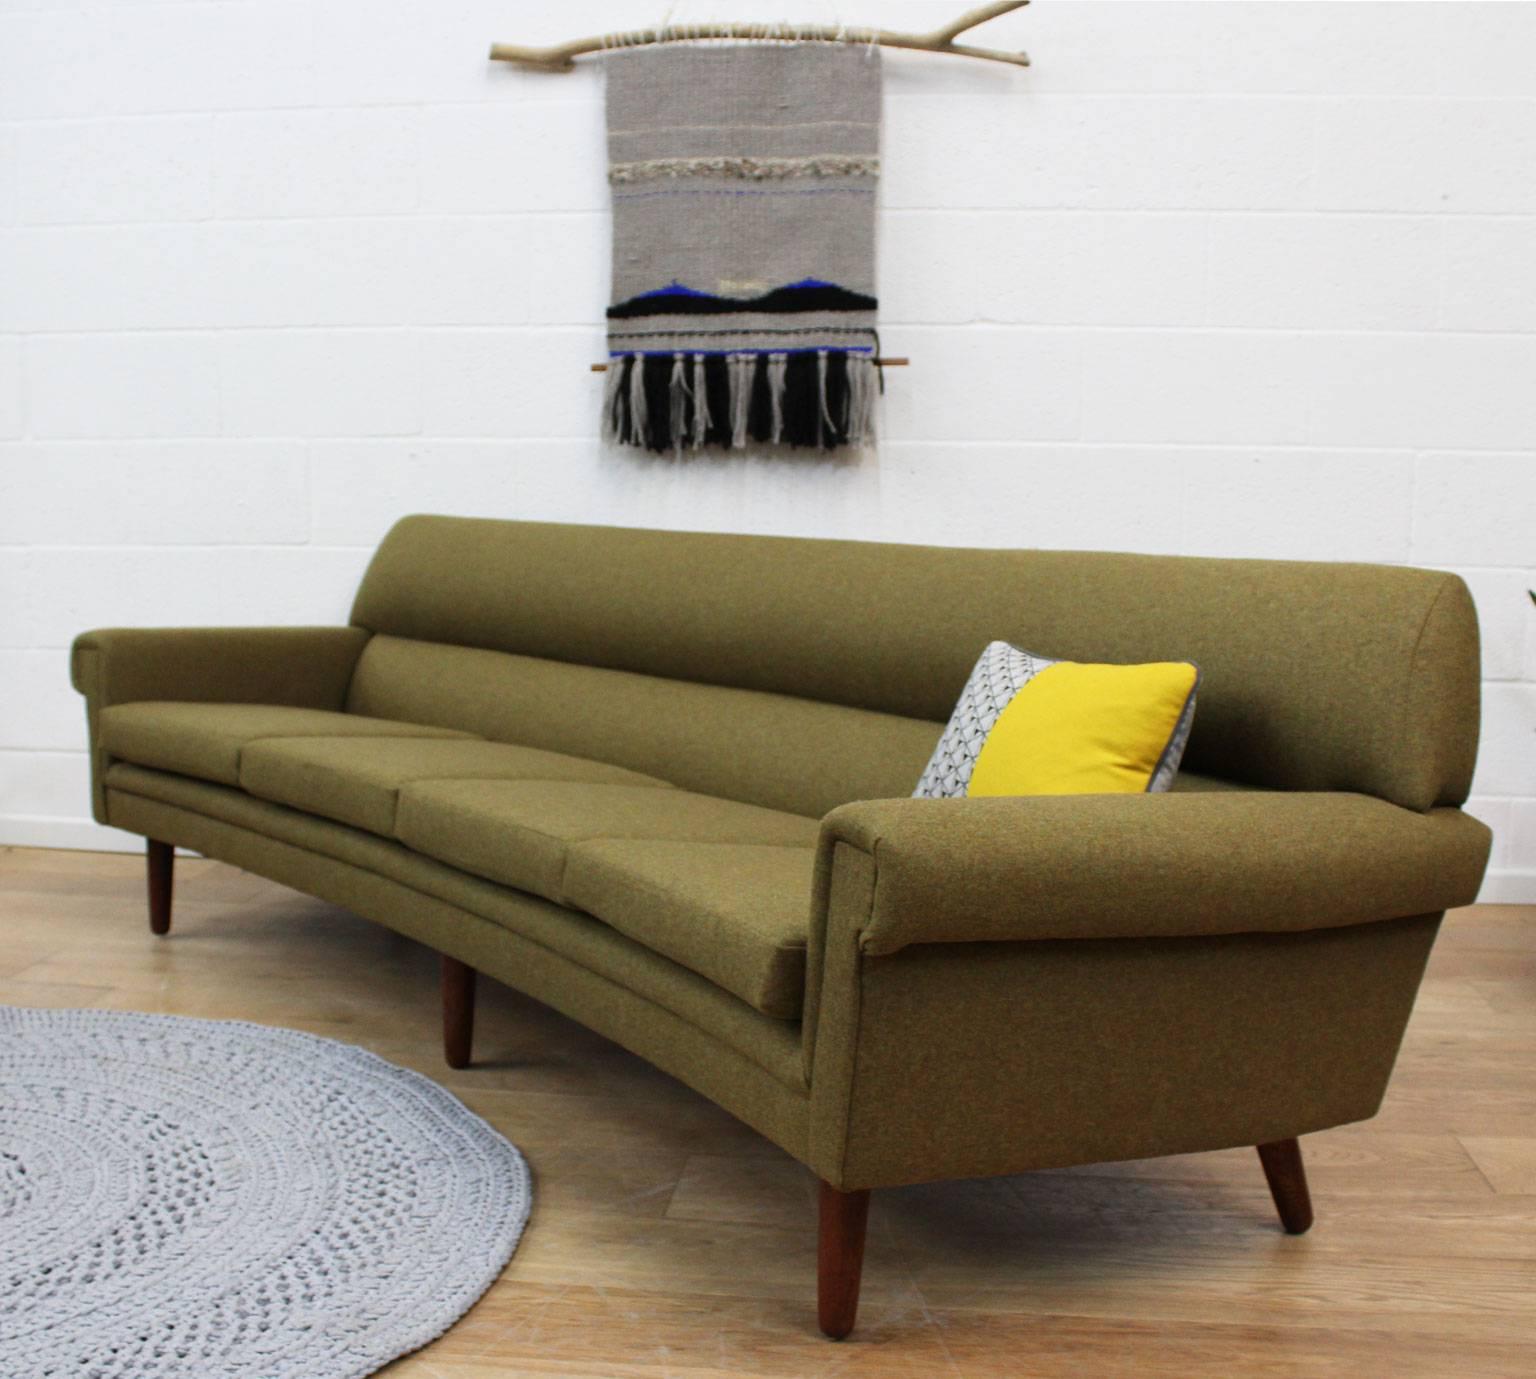 20th Century Danish Mid-Century Curved Four-Seat Sofa, Fully Restored in Wool